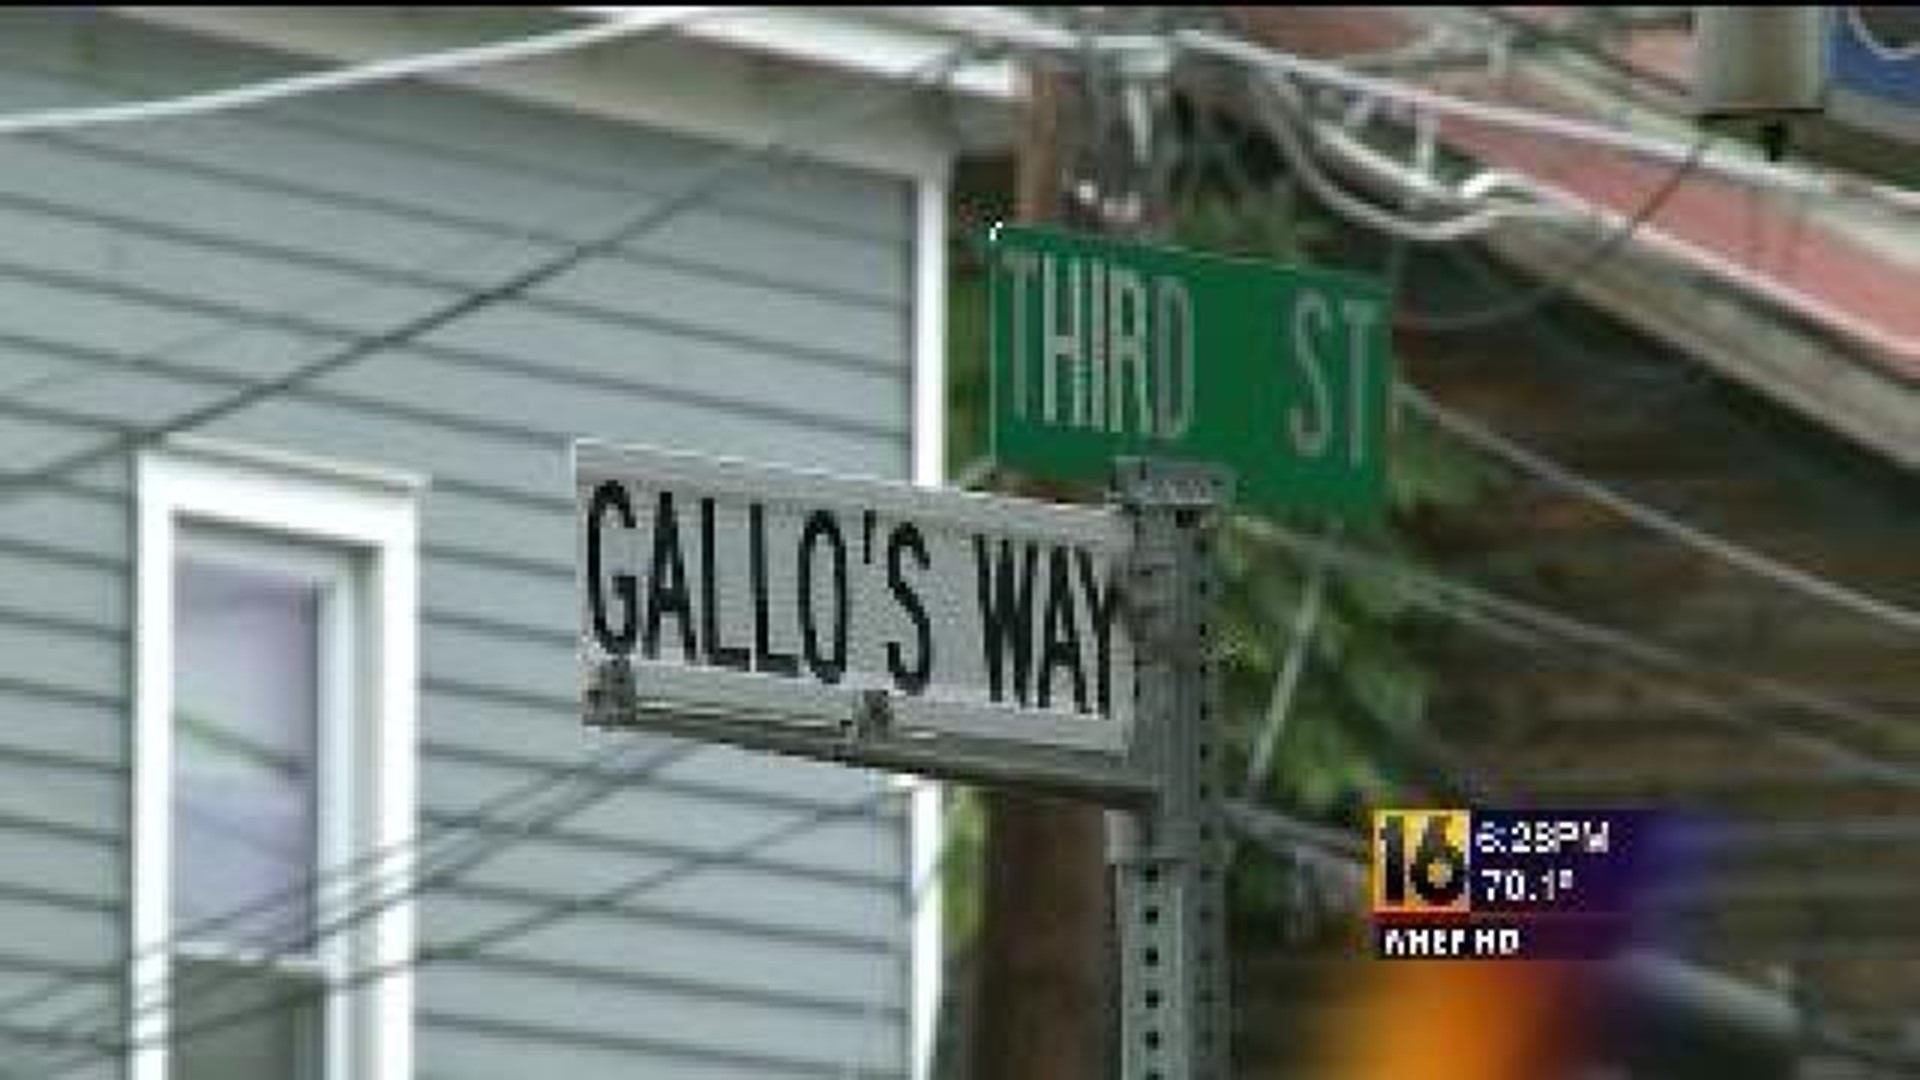 Stroudsburg Makes "Way" for Bar Owner